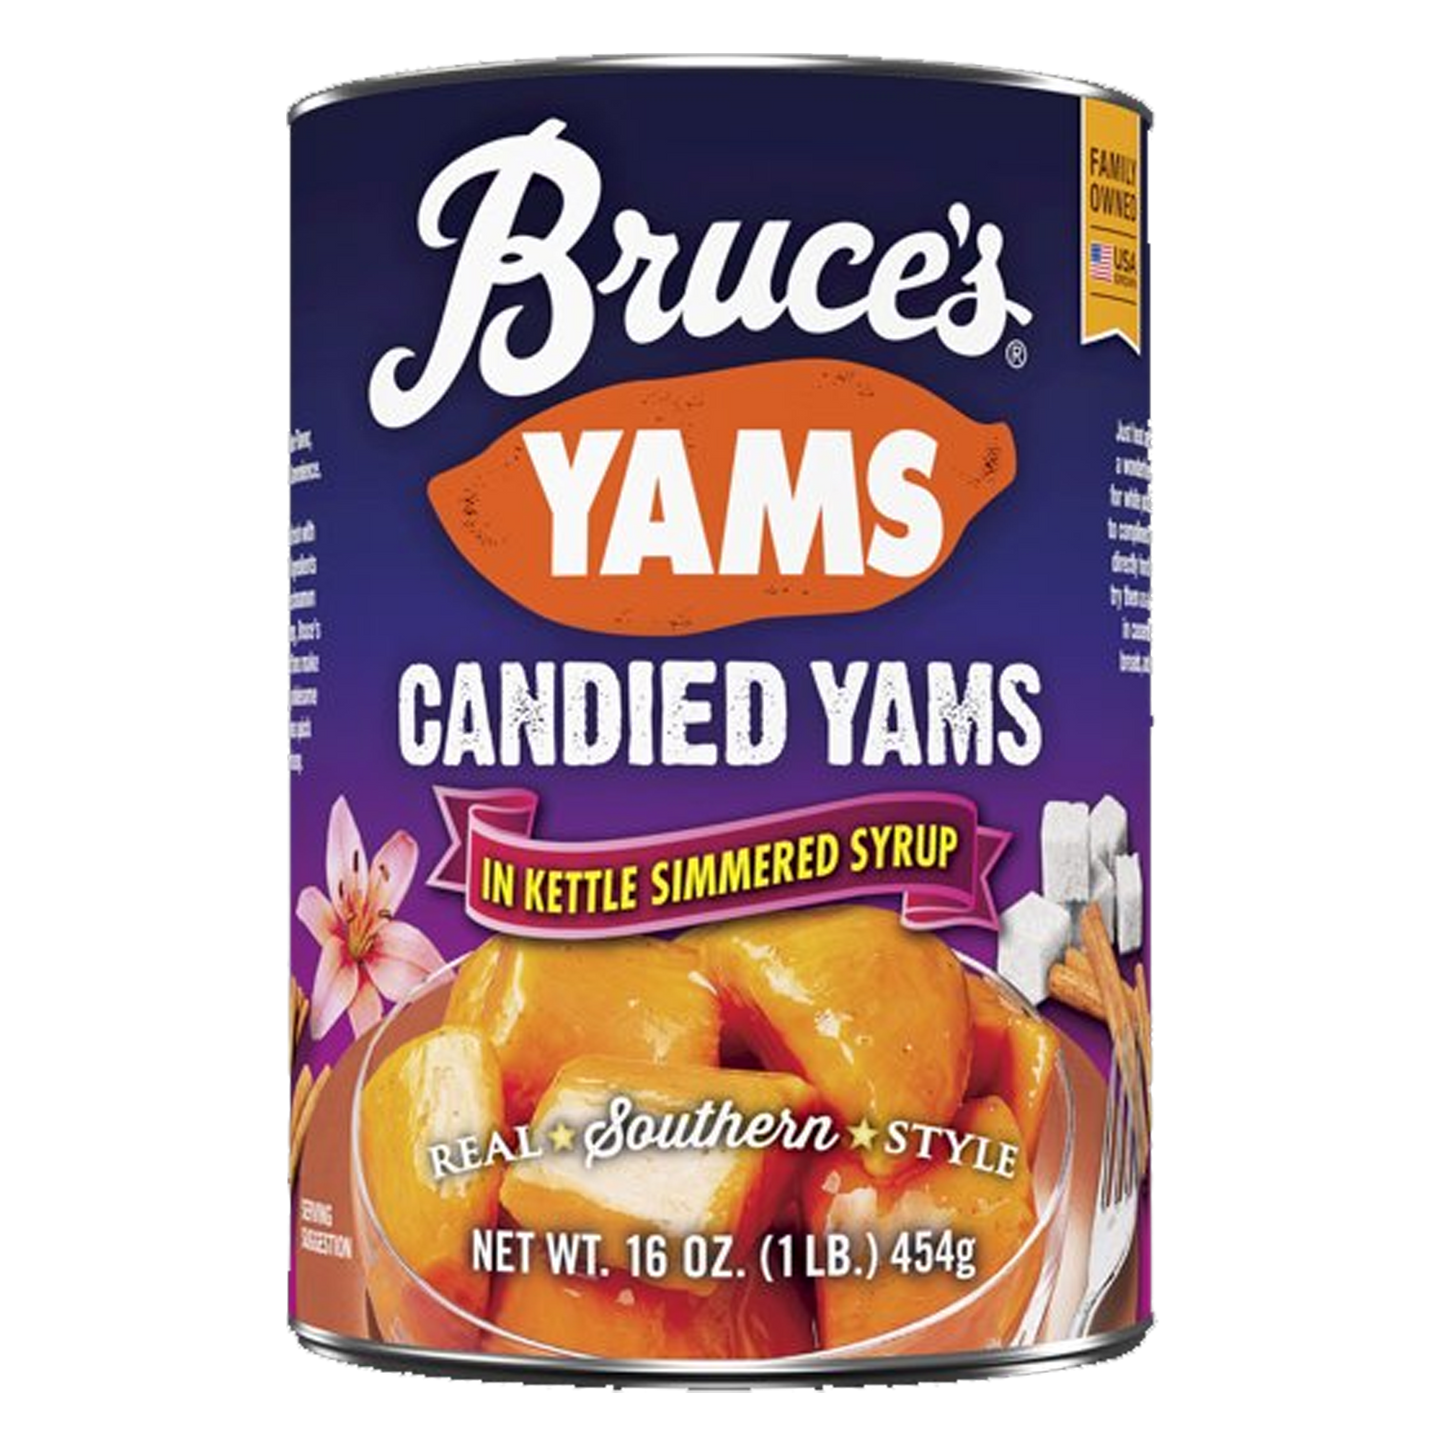 Bruce's Yams Candied Yams in Kettle Simmered Syrup 454g